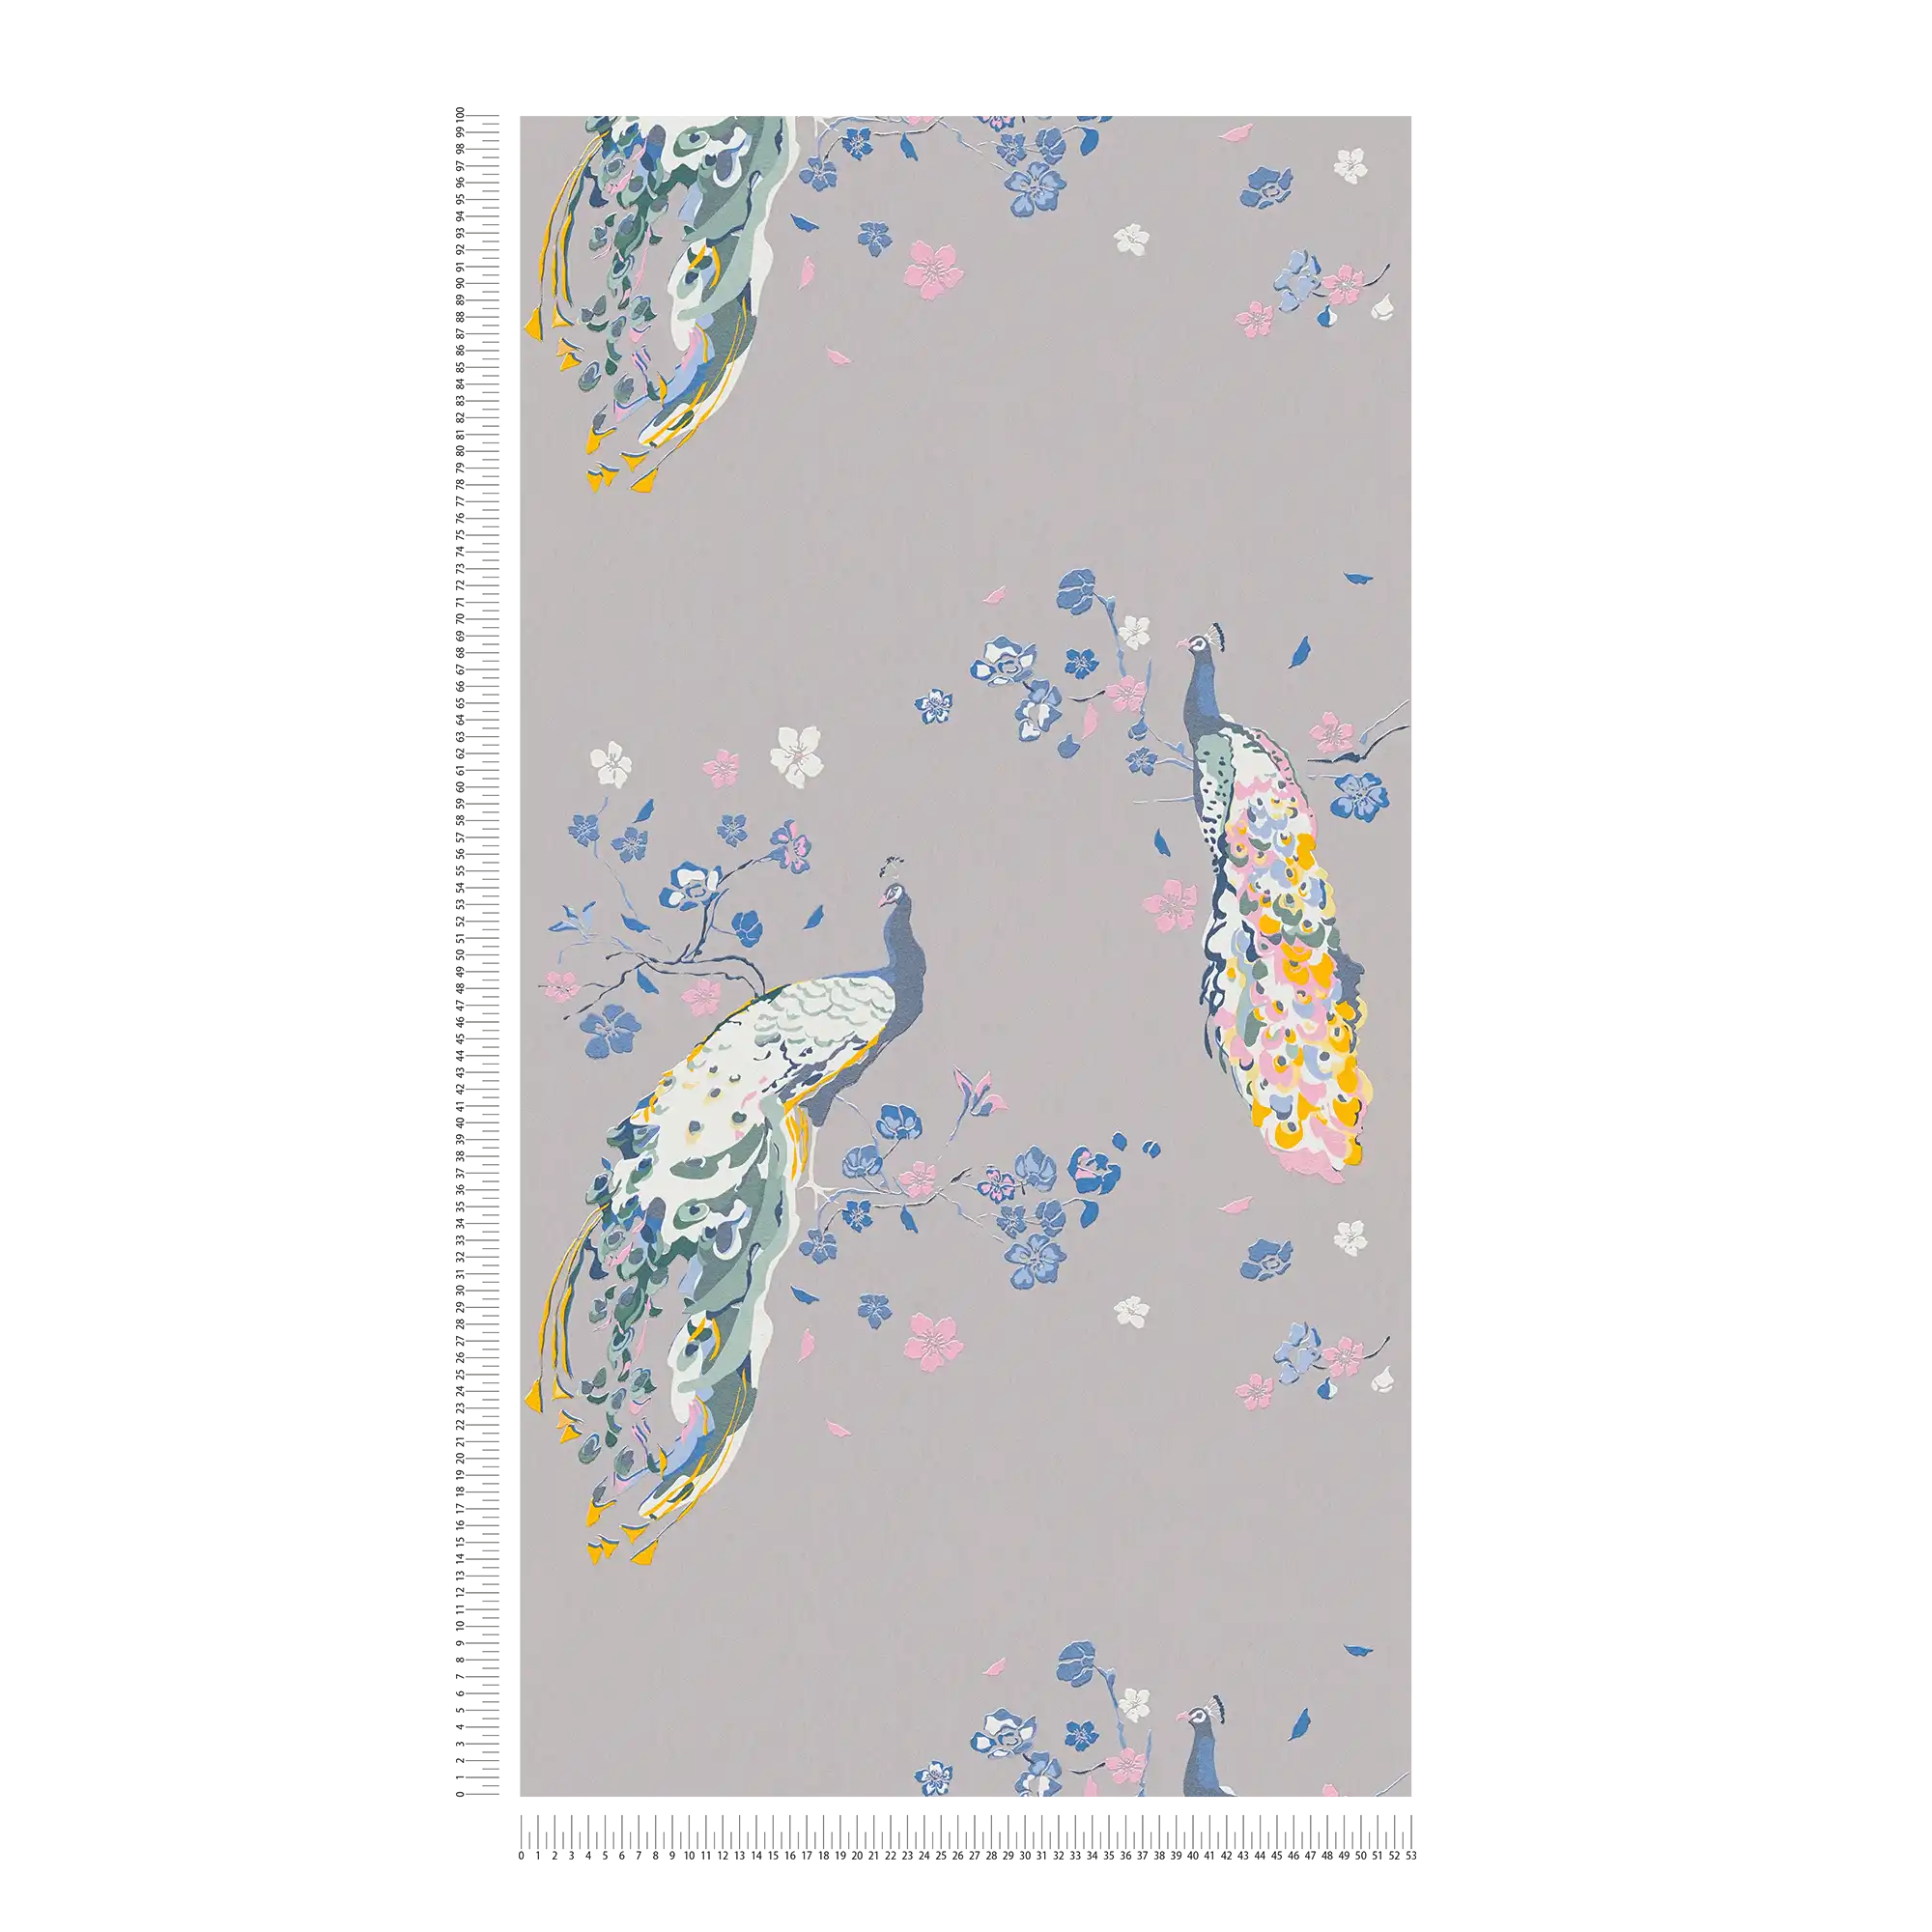             Non-woven wallpaper with peacock pattern and glossy effect - grey, blue, colourful
        